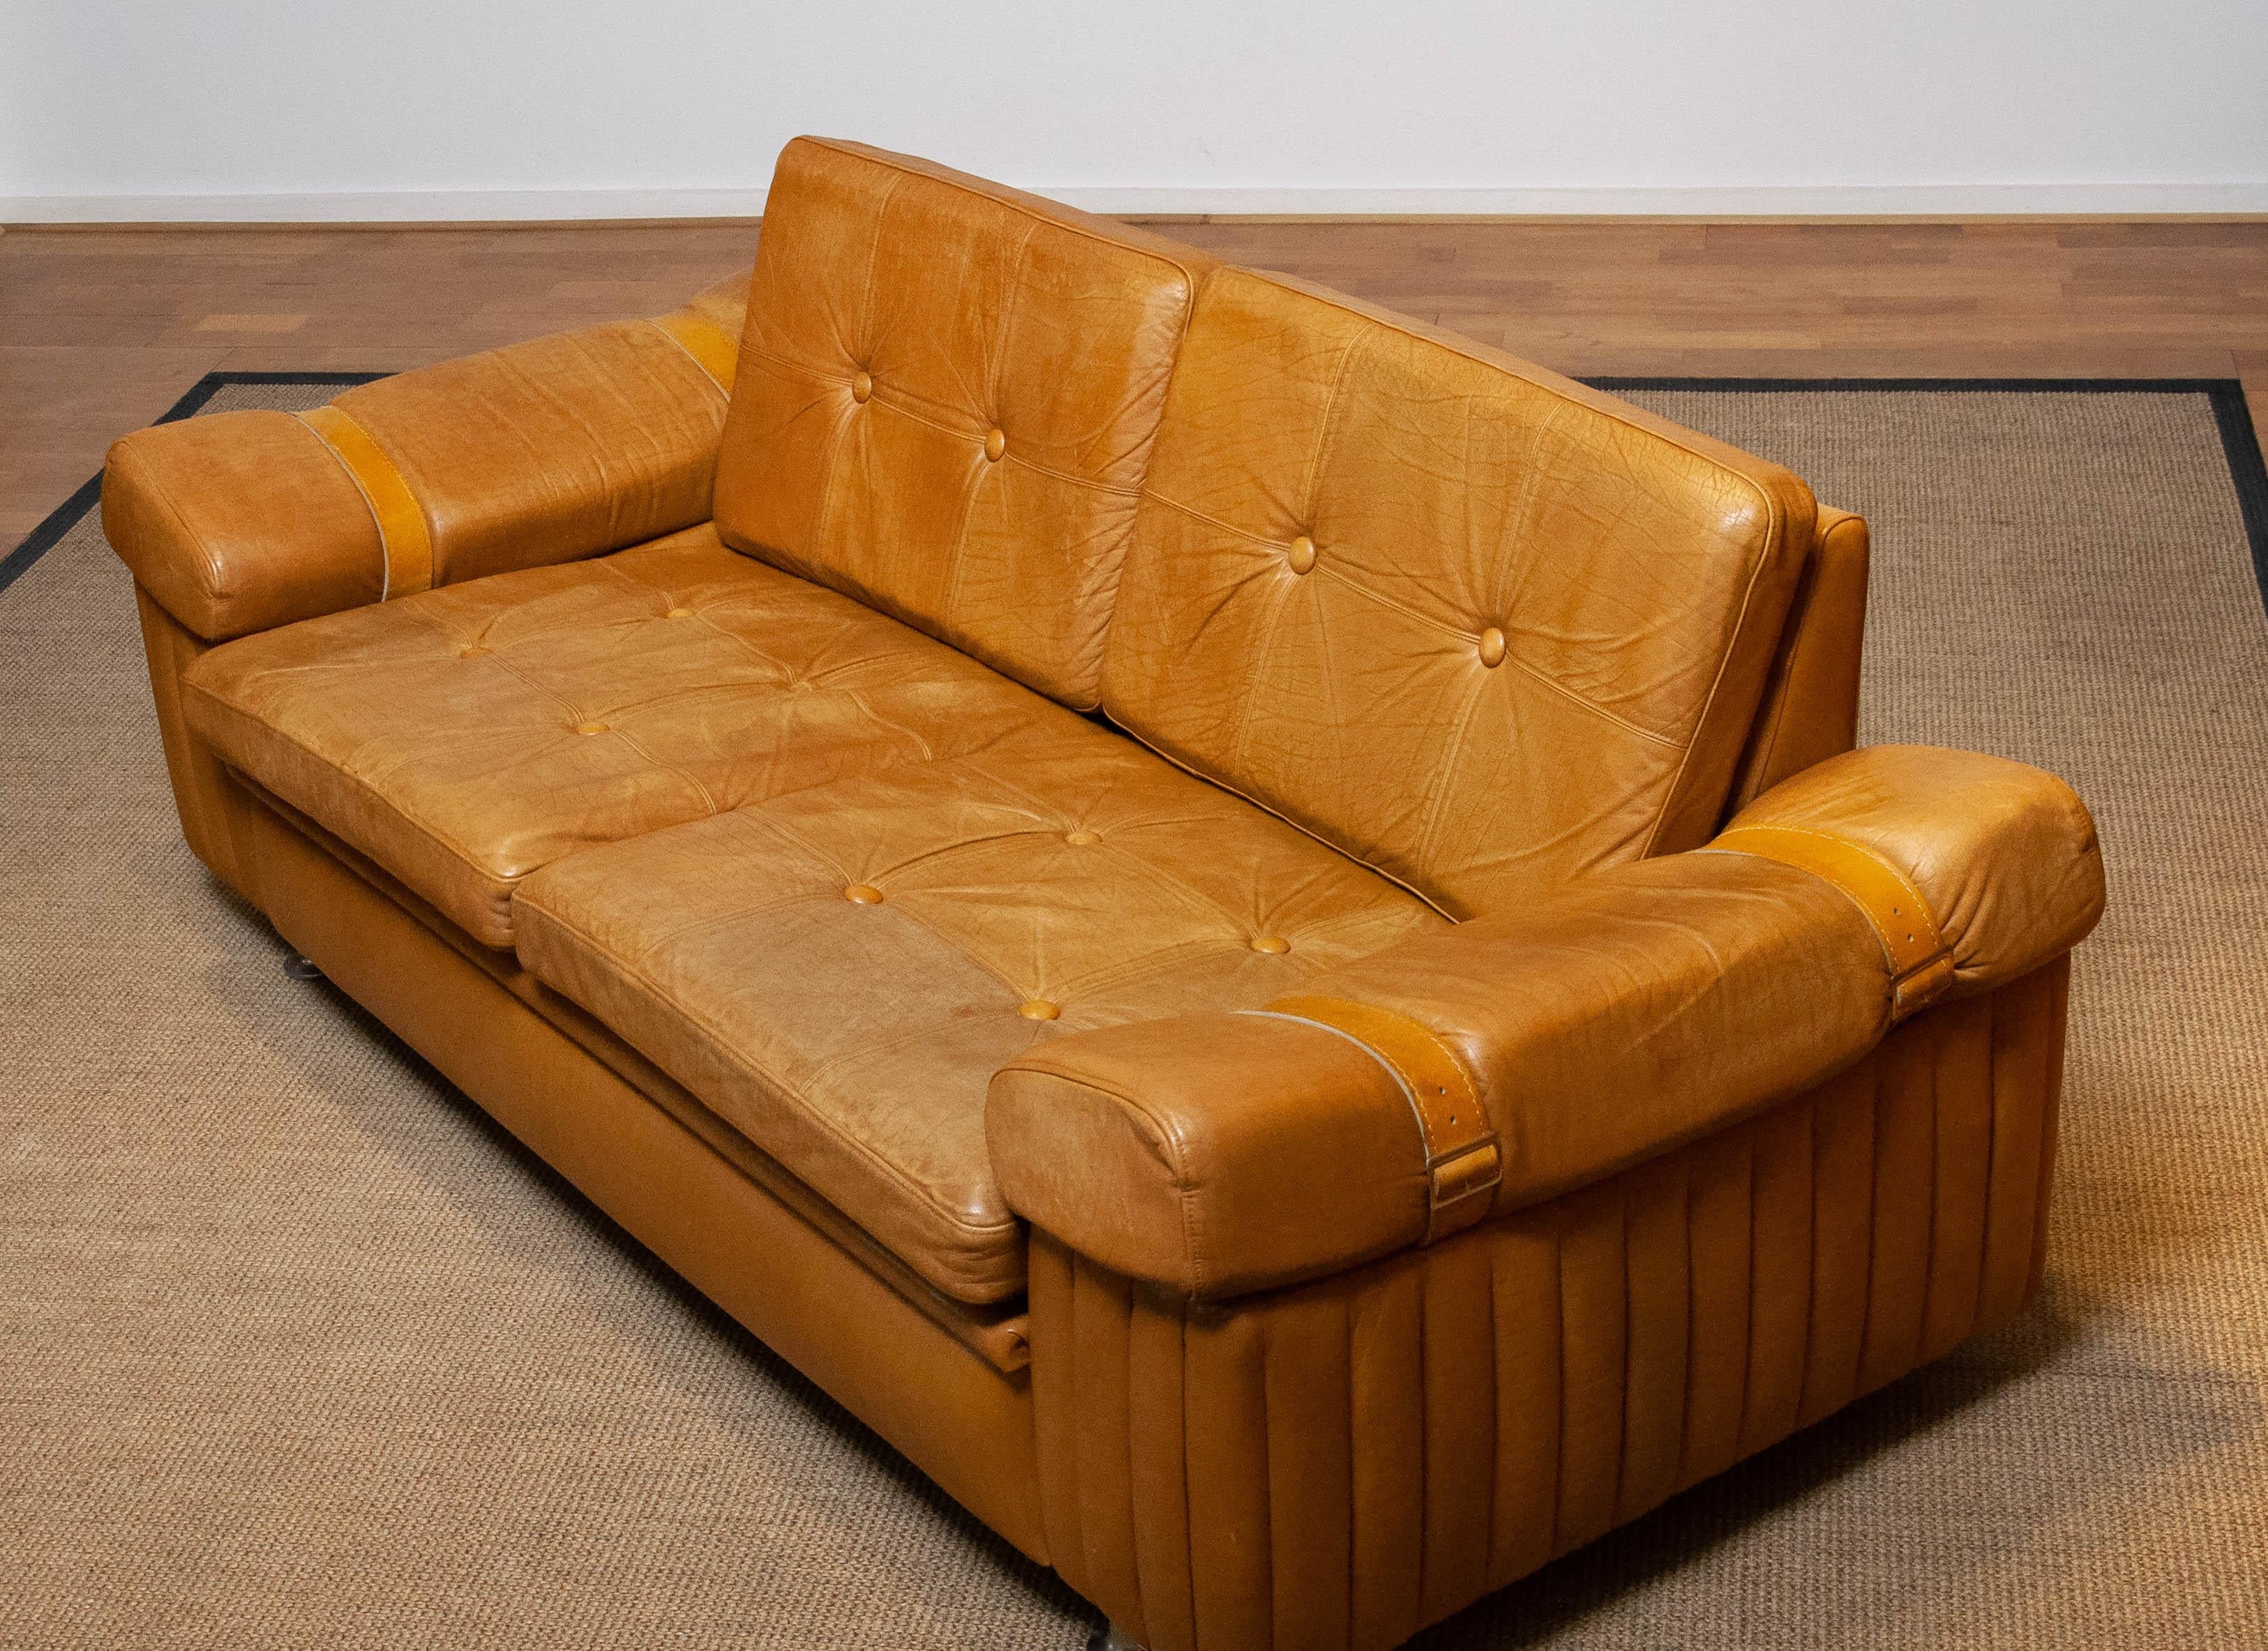 Late 20th Century 1970s Scandinavian Brutalist Two-Seater Low-Back Sofa in Camel Colored Leather For Sale